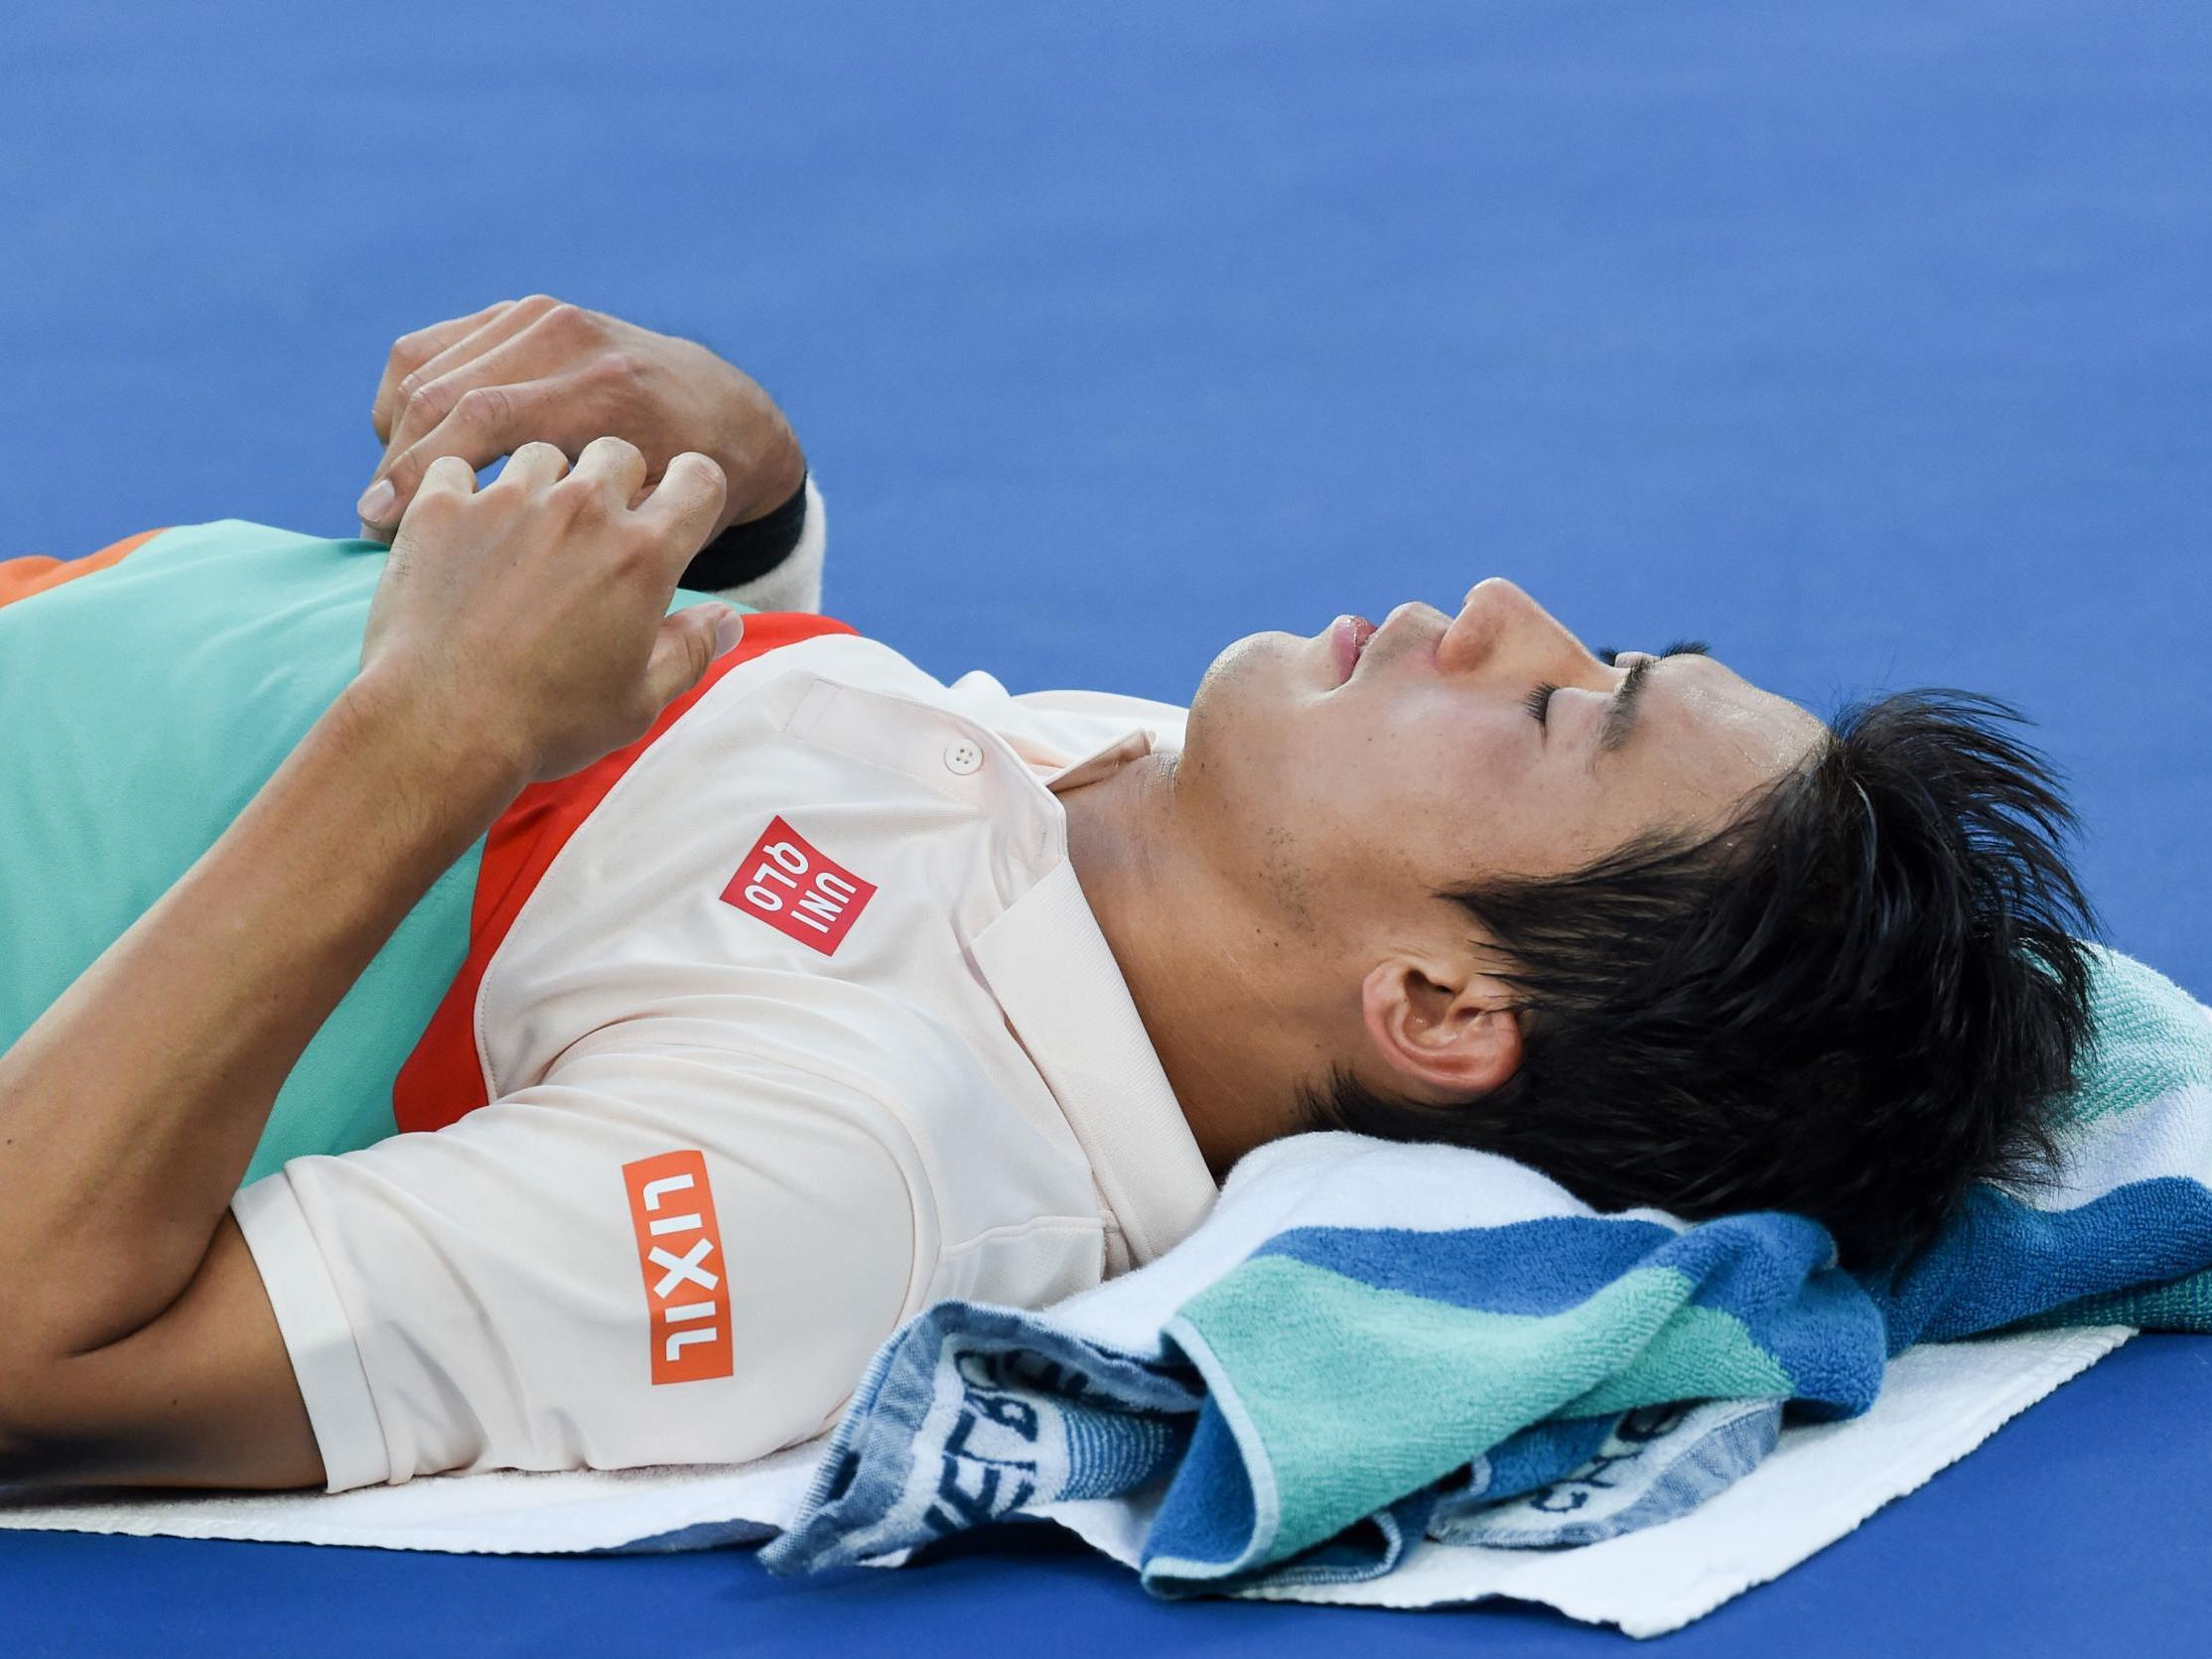 Kei Nishikori was forced to retire hurt during the second set